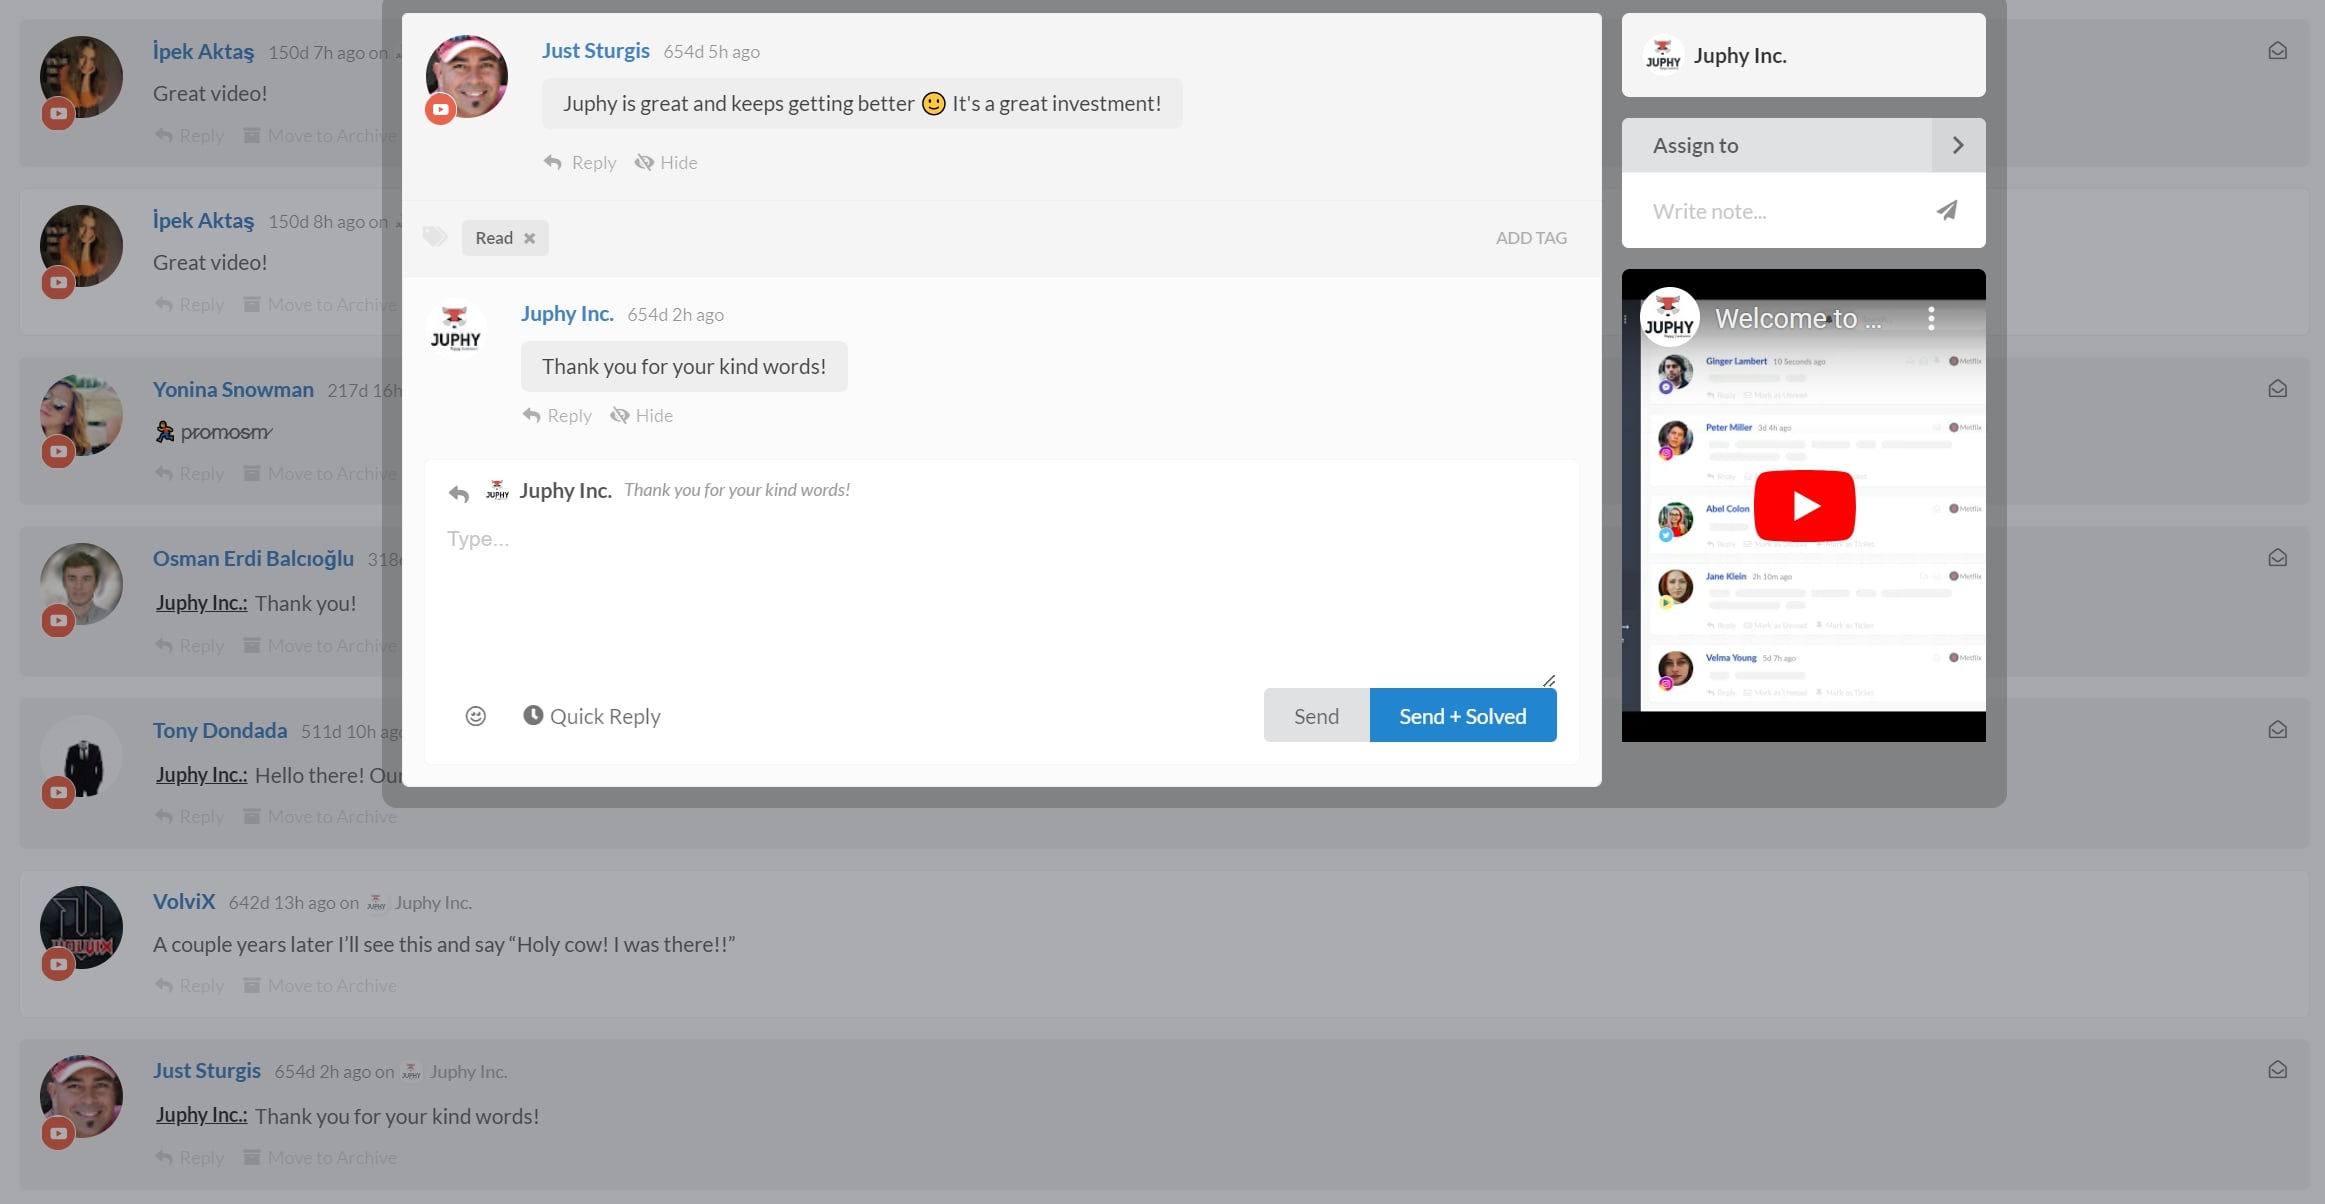 You can manage YouTube comments and interactions on your other social accounts on a single dashboard, thanks to Juphy.